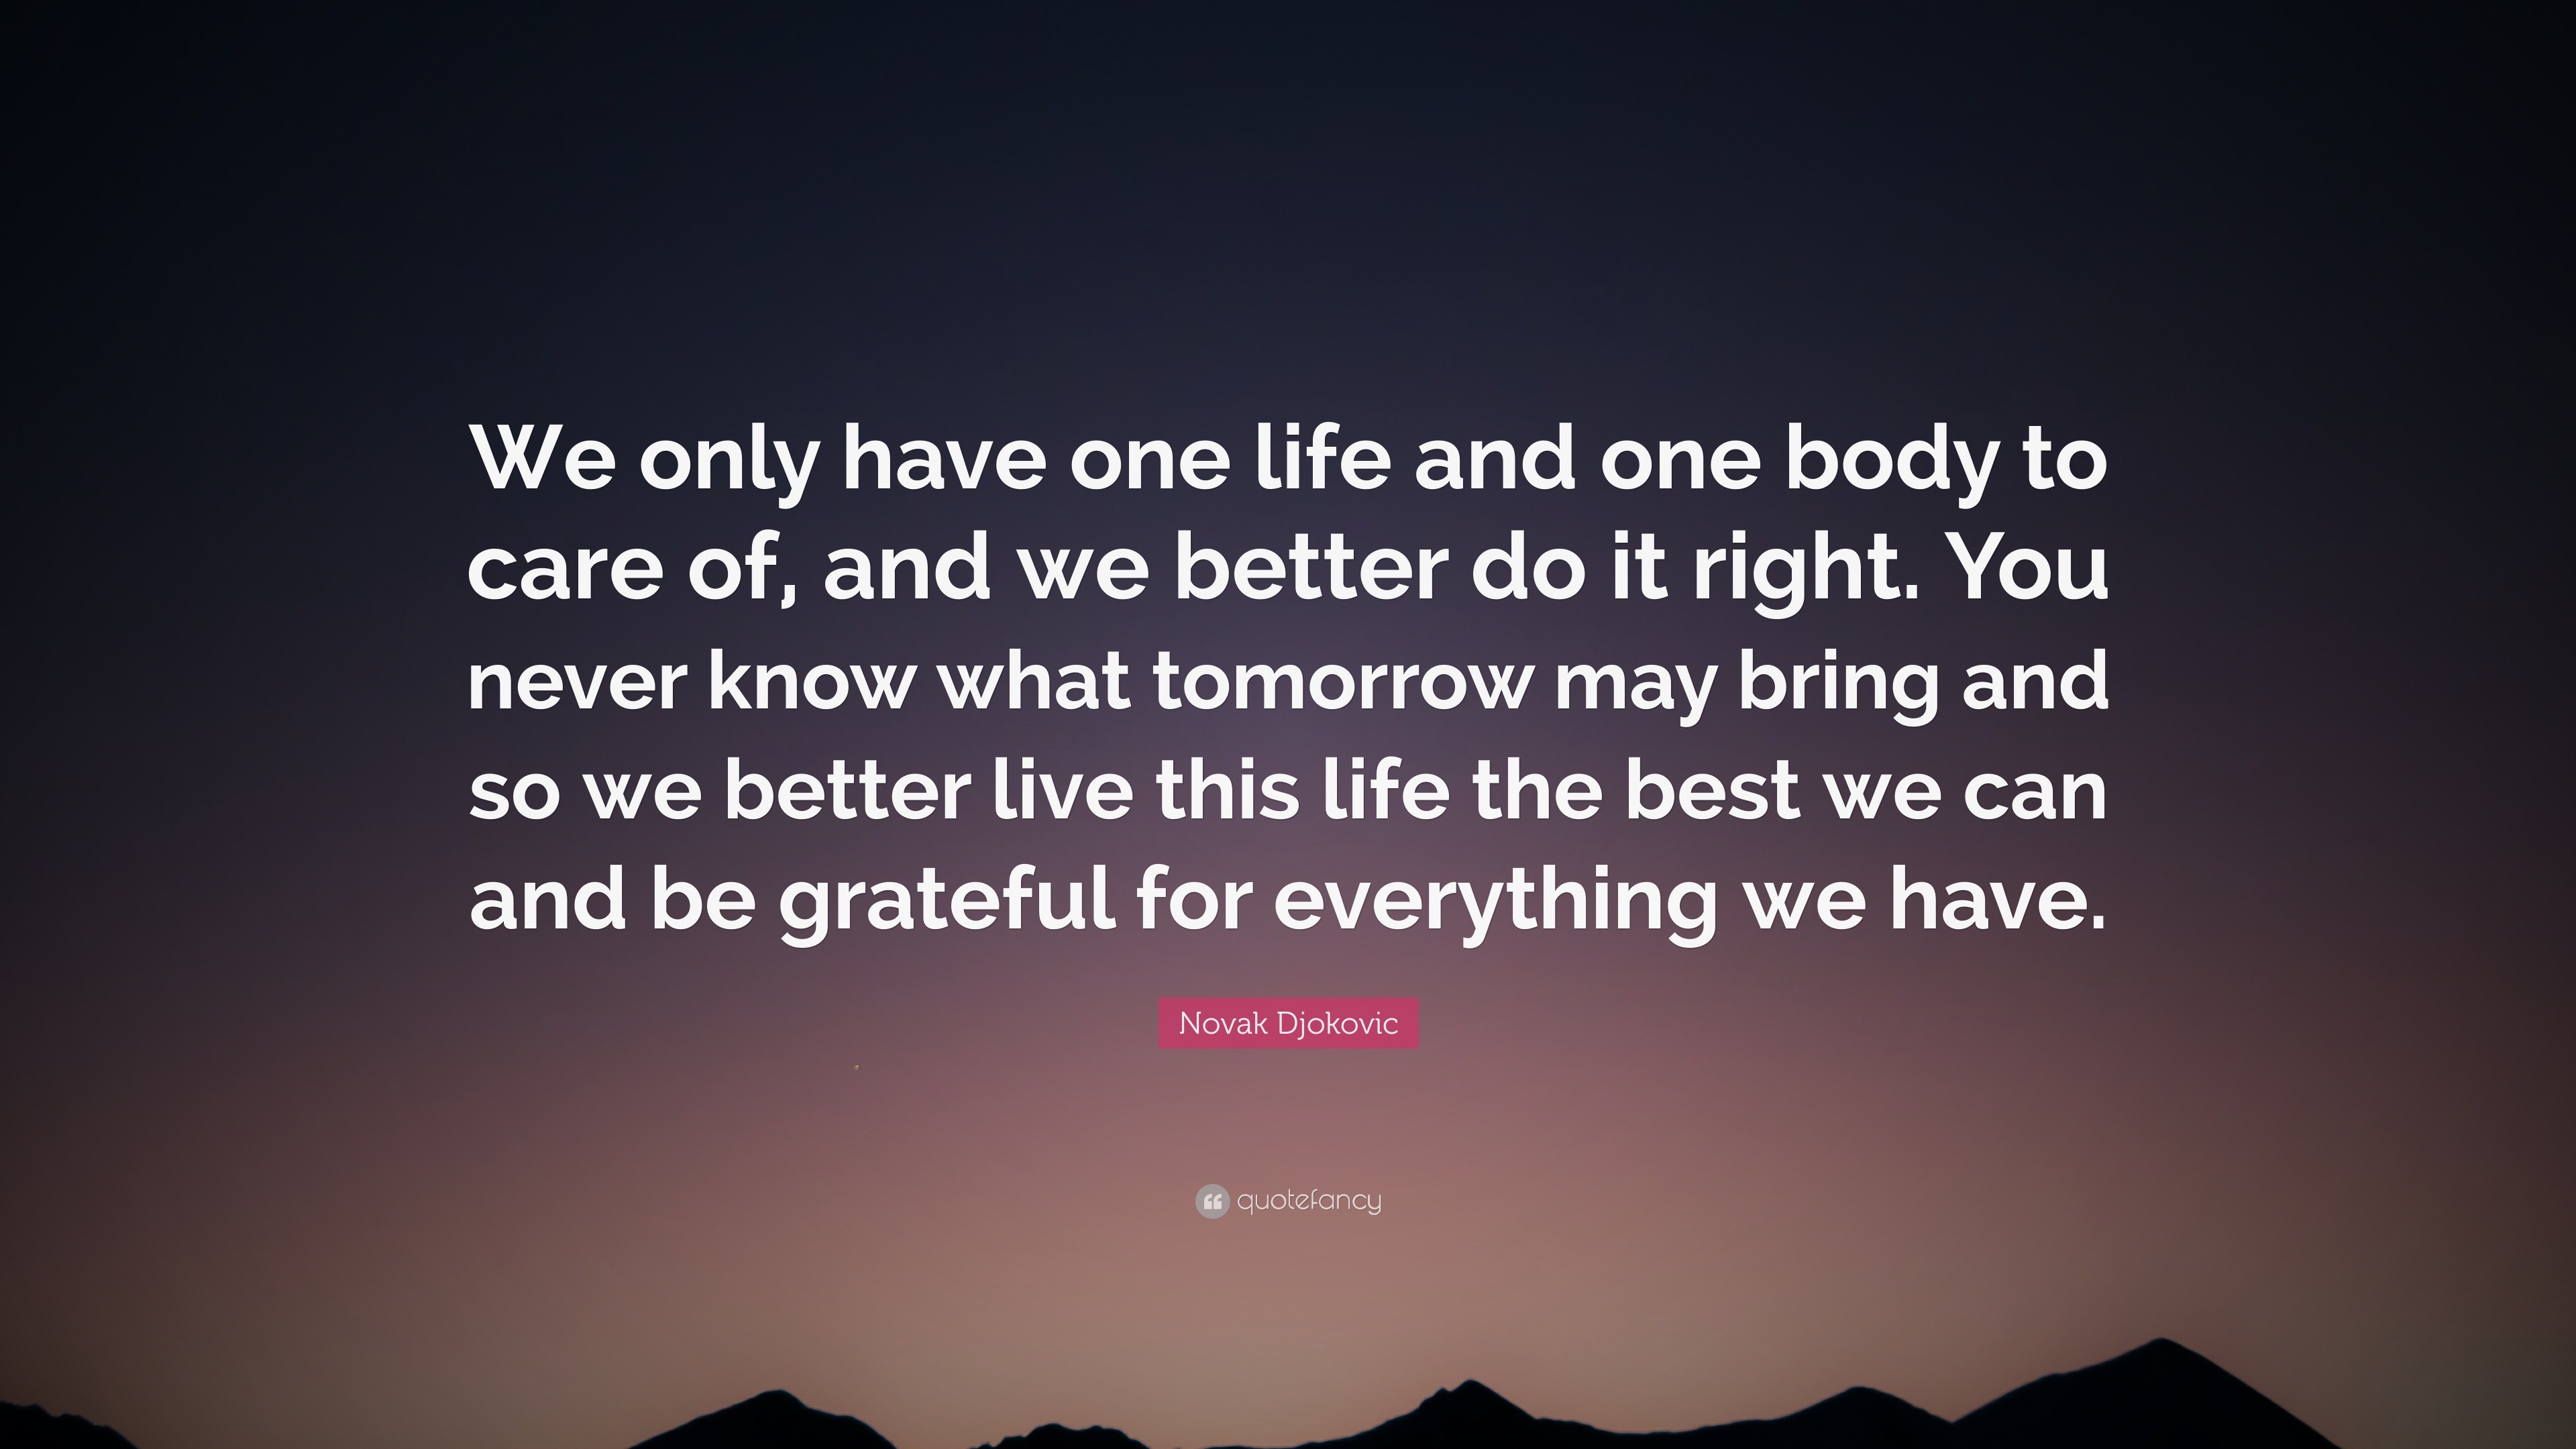 Novak Djokovic Quote: "We only have one life and one body ...